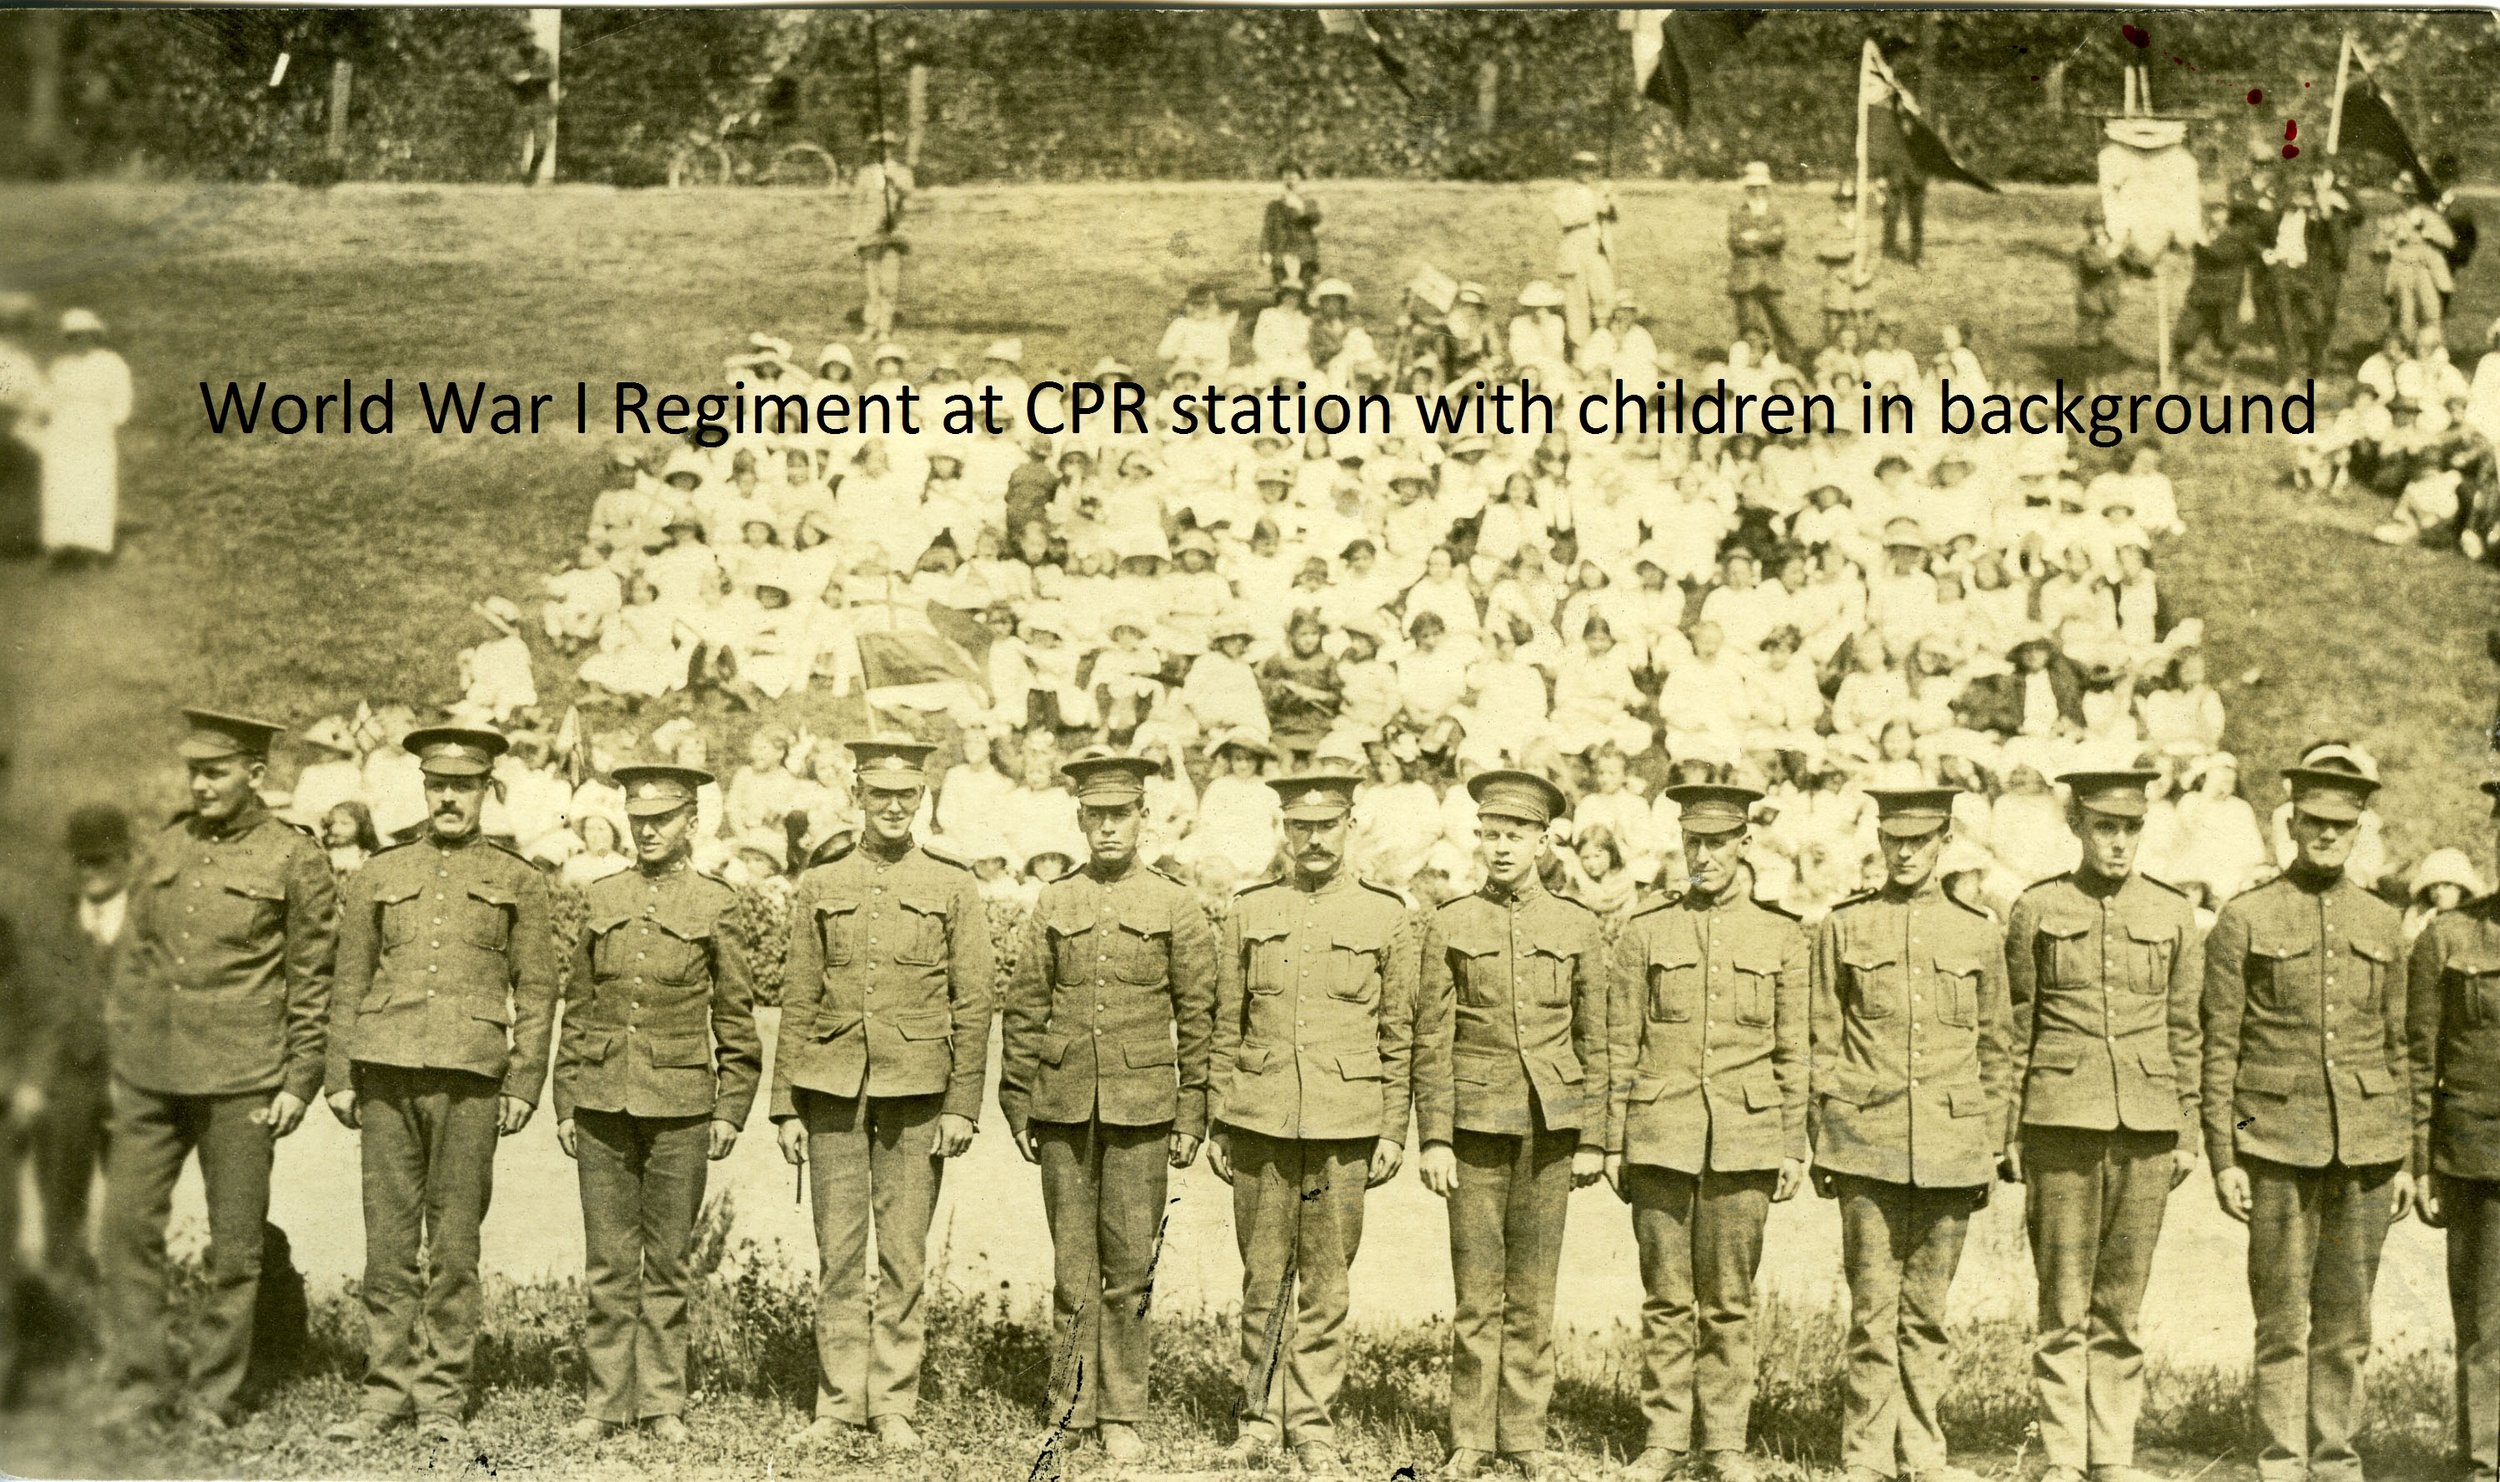 2420 World War I regiment (probably RMR) possibly at CPR station with school children in background.jpg